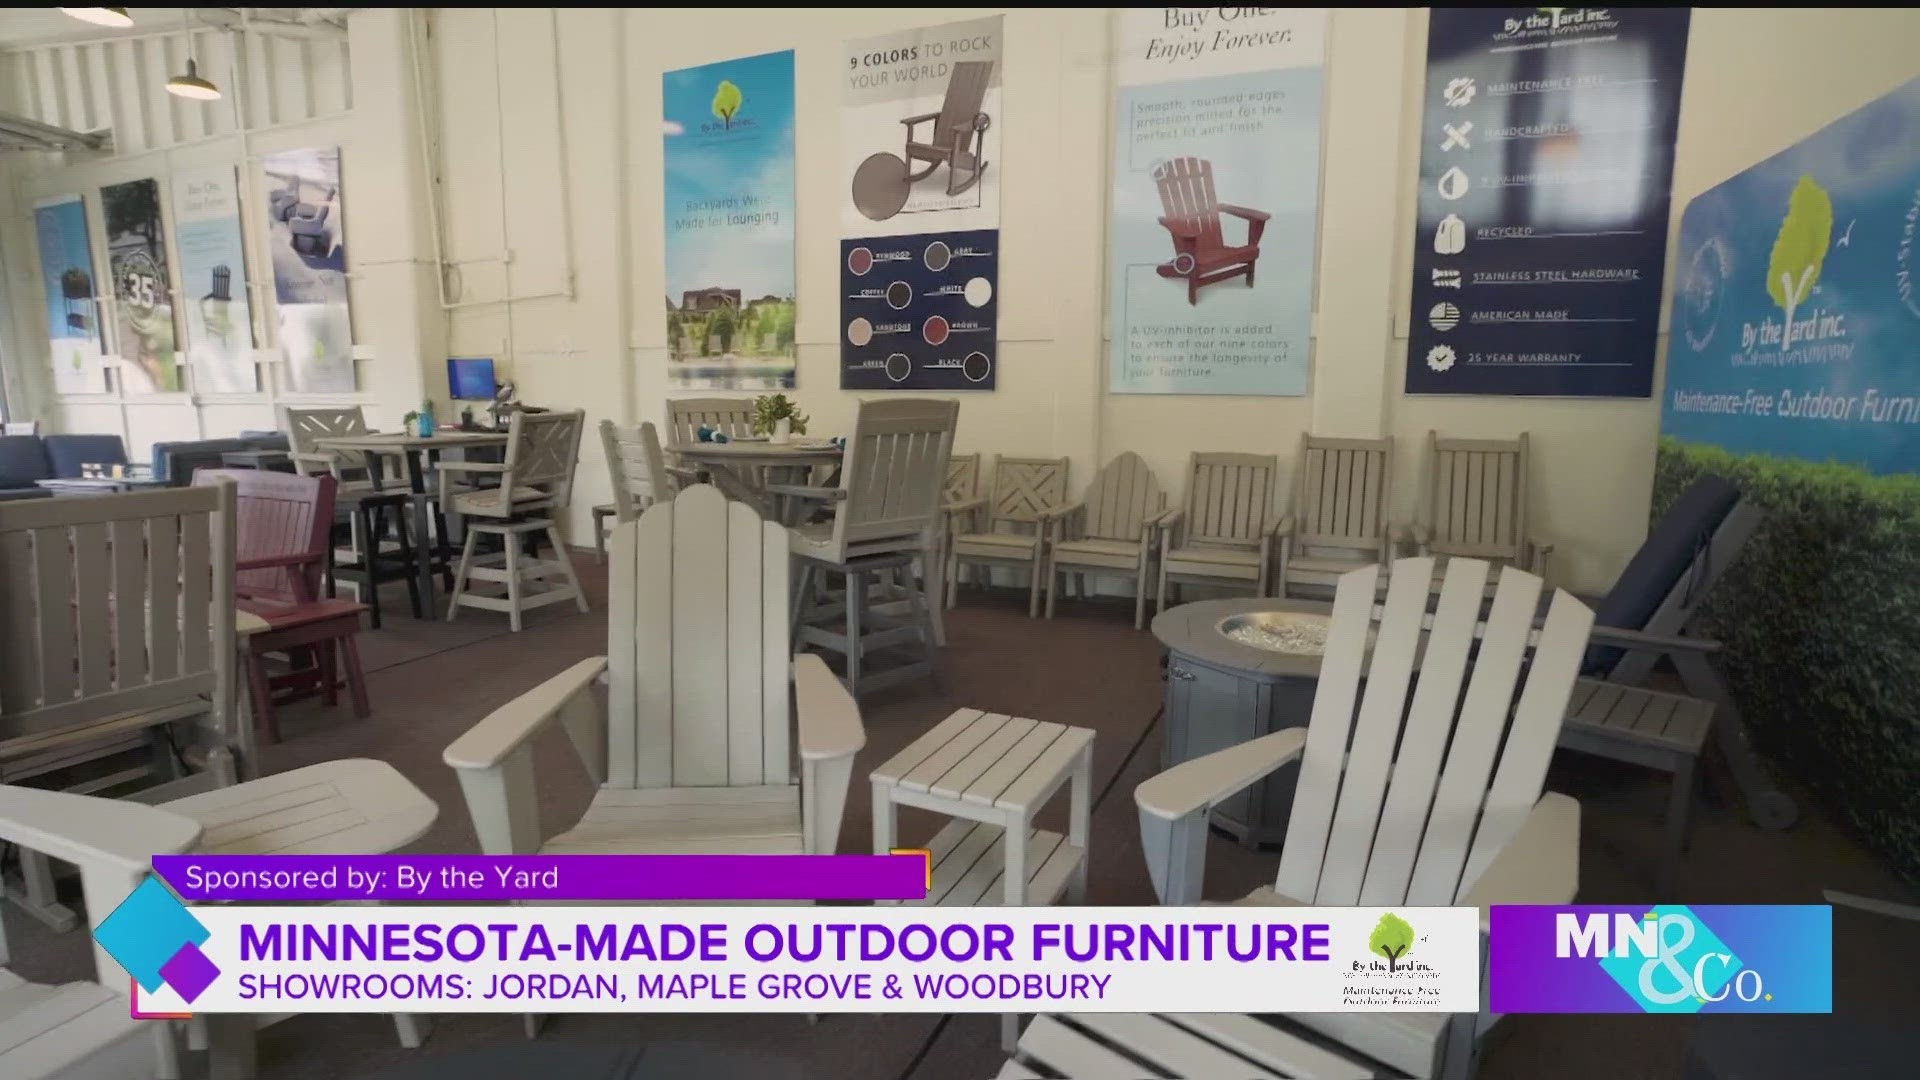 By the Yard is offering 10% off all furniture during the Minnesota State Fair.